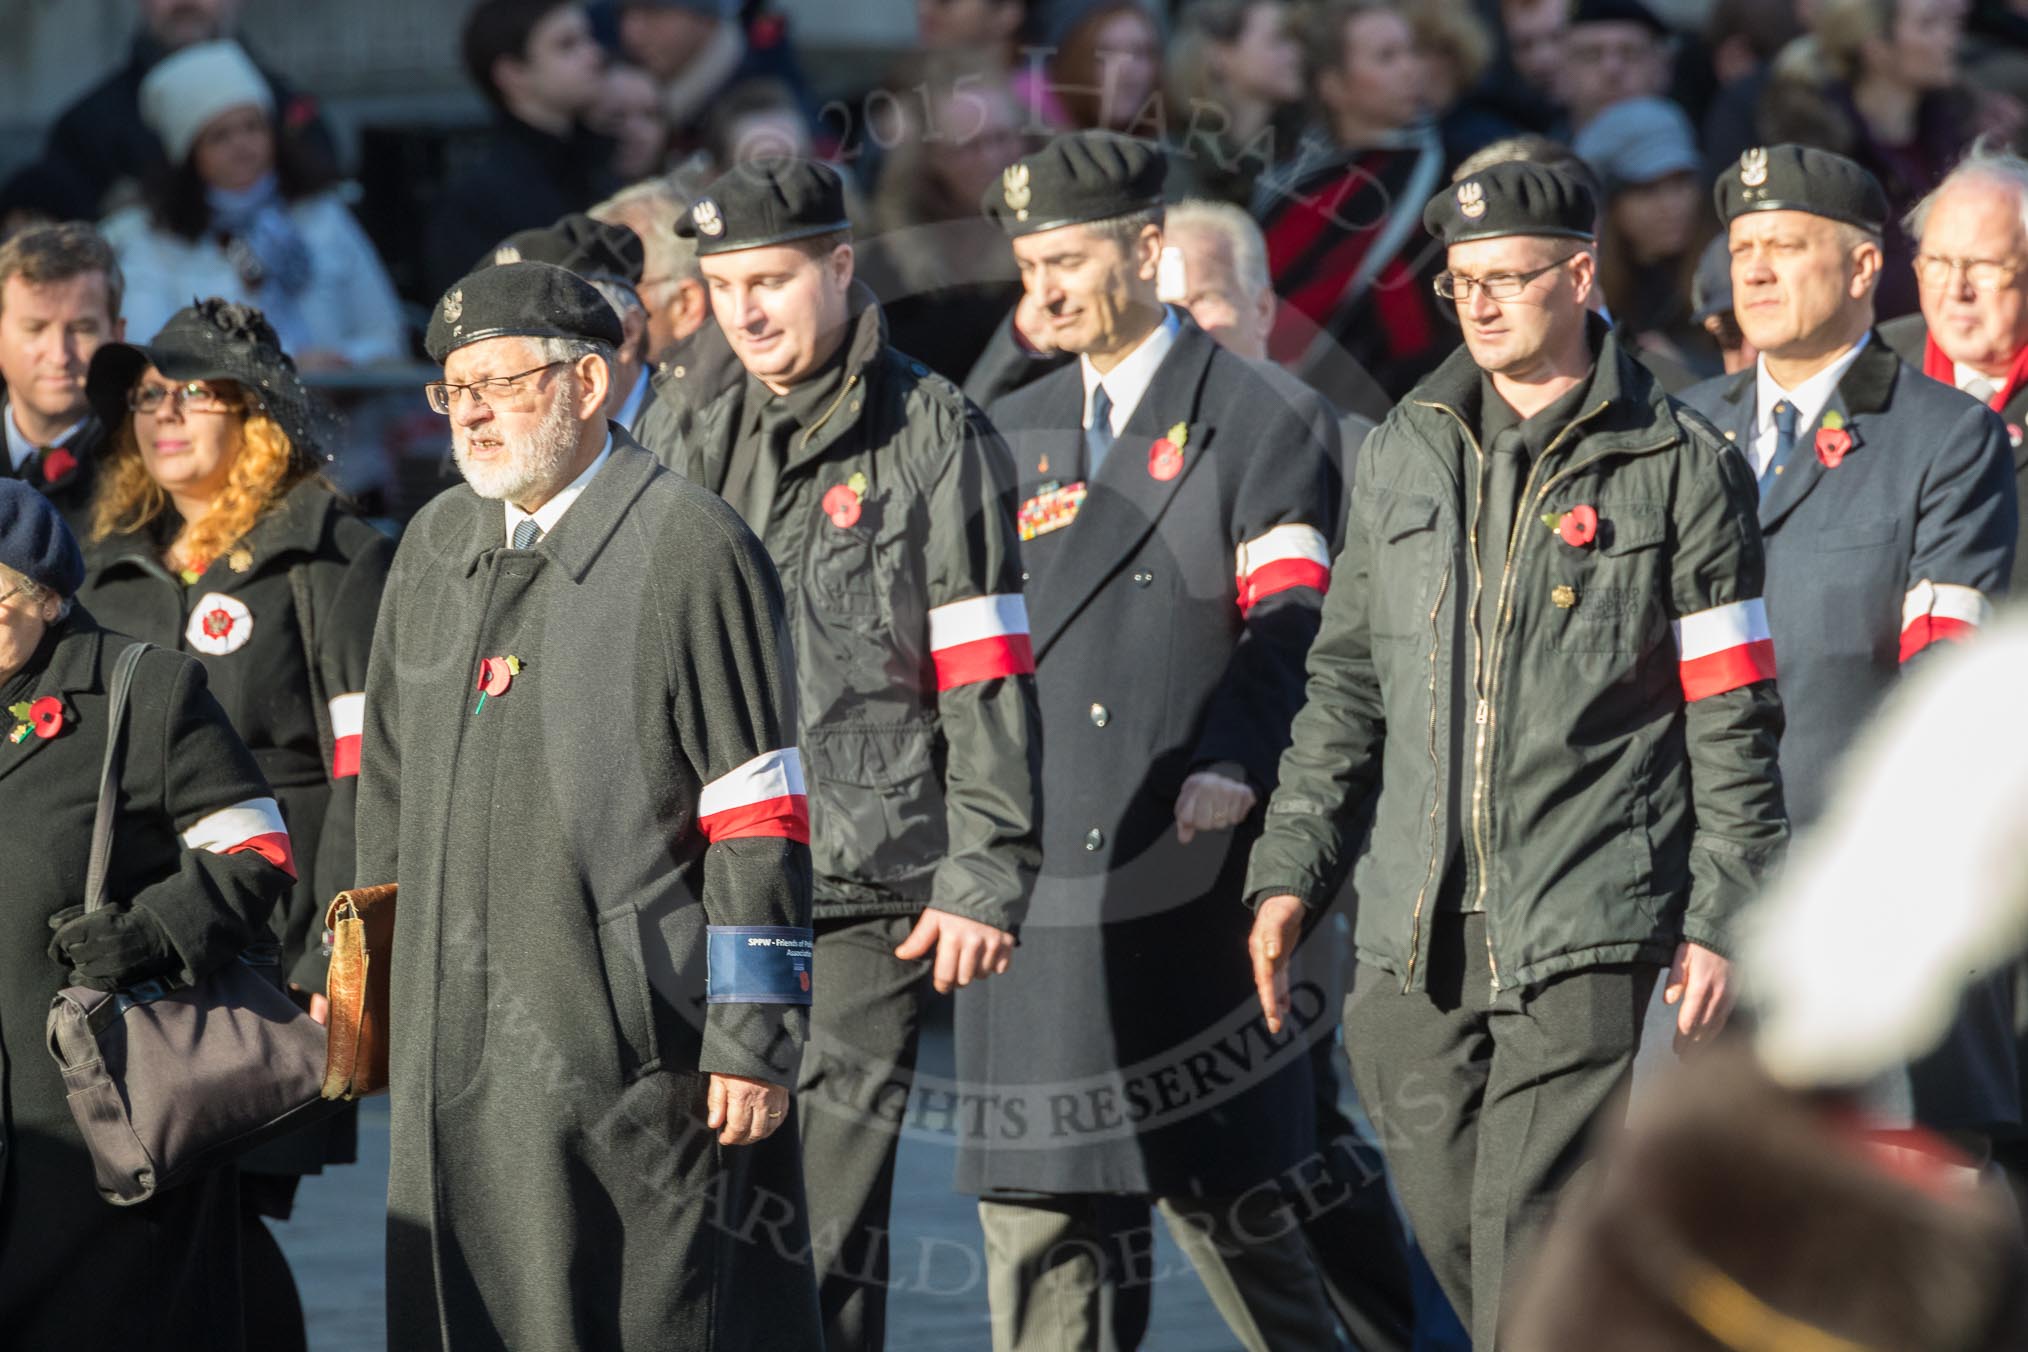 March Past, Remembrance Sunday at the Cenotaph 2016: M42 SPPW - Friends of Polish Veterans Association.
Cenotaph, Whitehall, London SW1,
London,
Greater London,
United Kingdom,
on 13 November 2016 at 13:19, image #2977